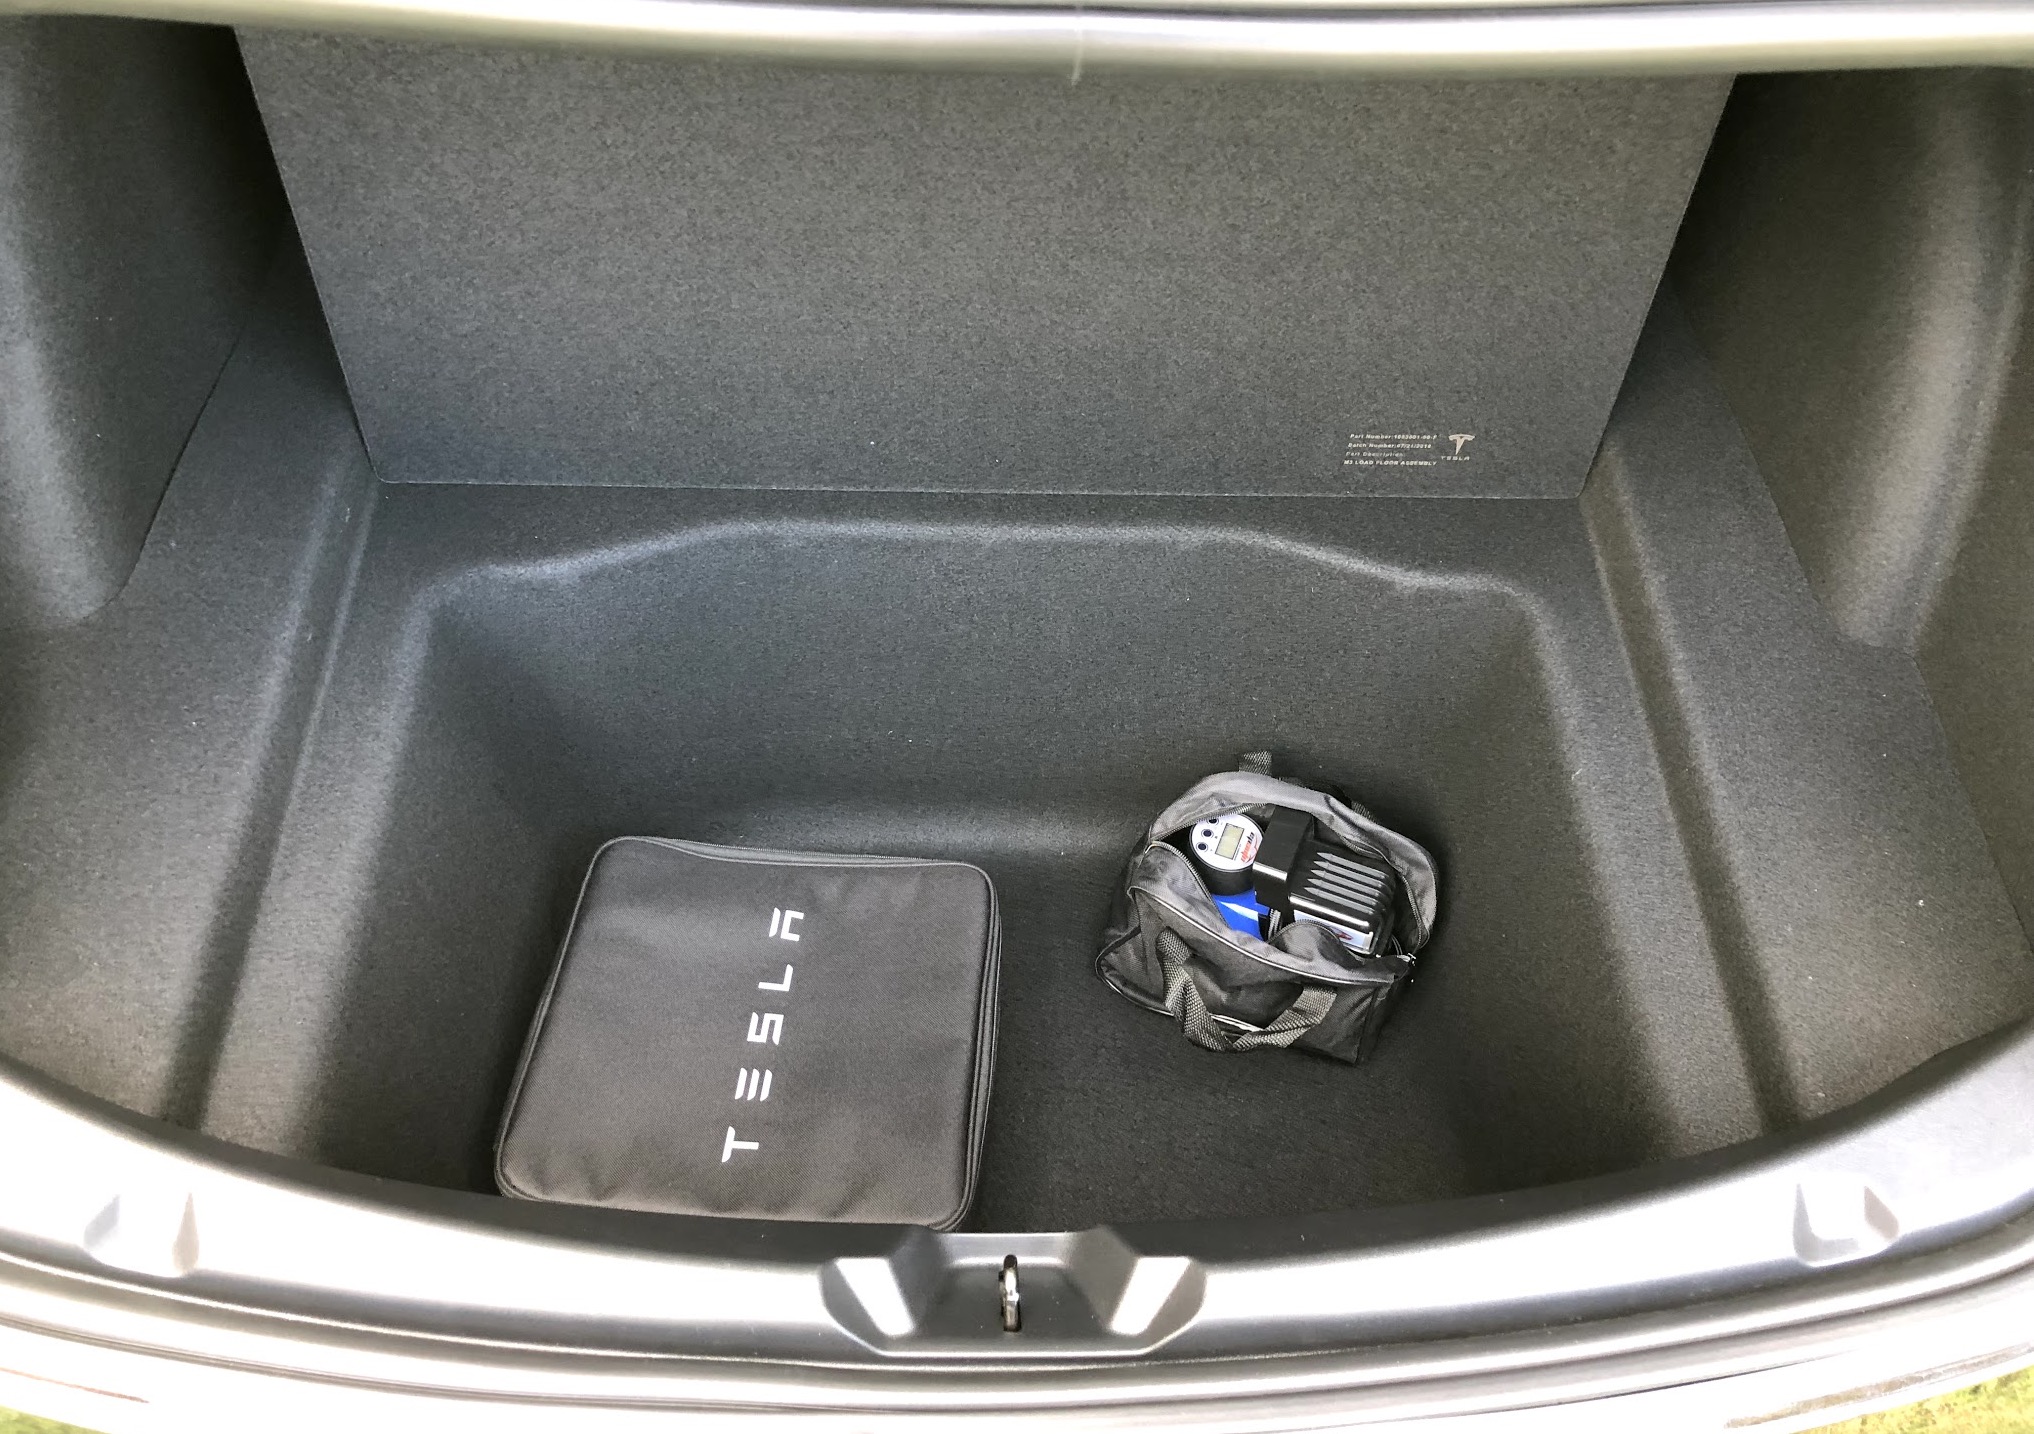 Top 15 Tesla accessories you must have